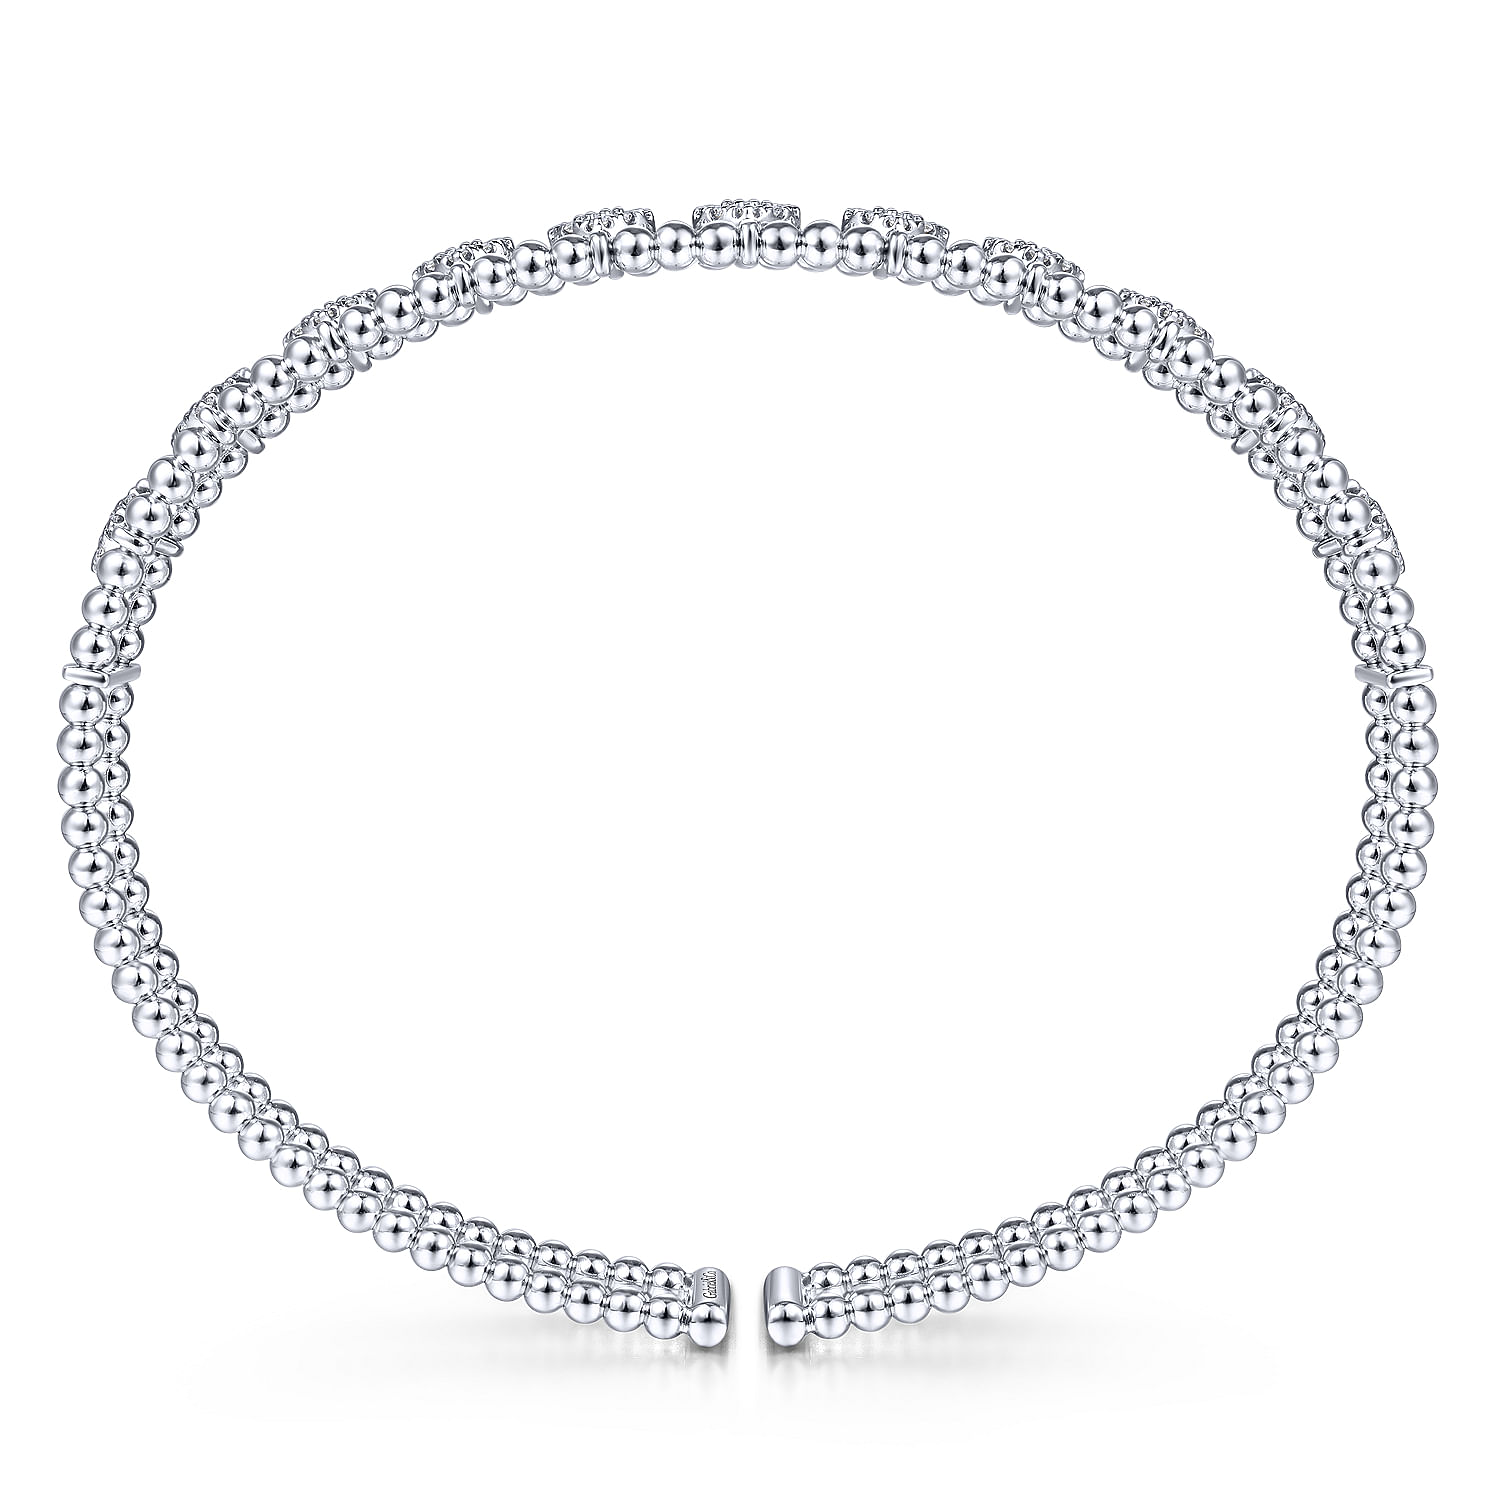 14K White Gold Bujukan Bead Cuff Bracelet with Pave Diamond Connectors - 0.85 ct - Shot 3